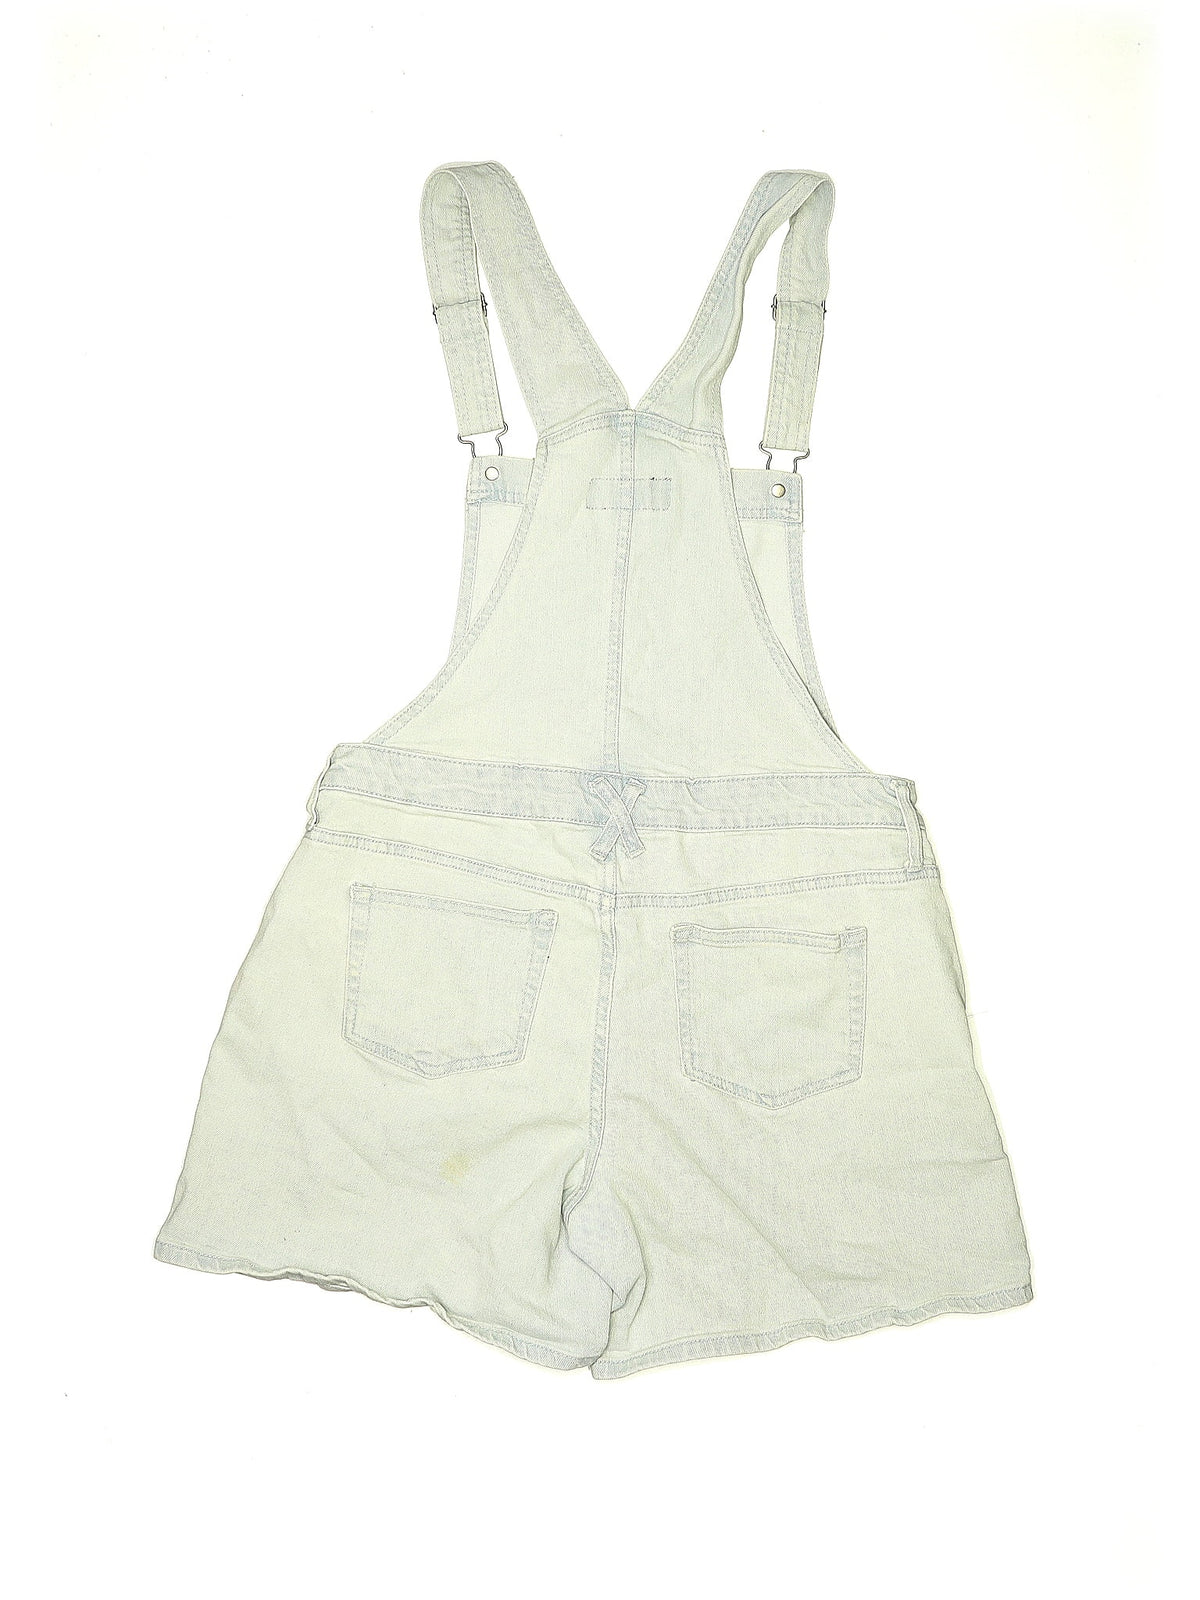 Overall Shorts size - M